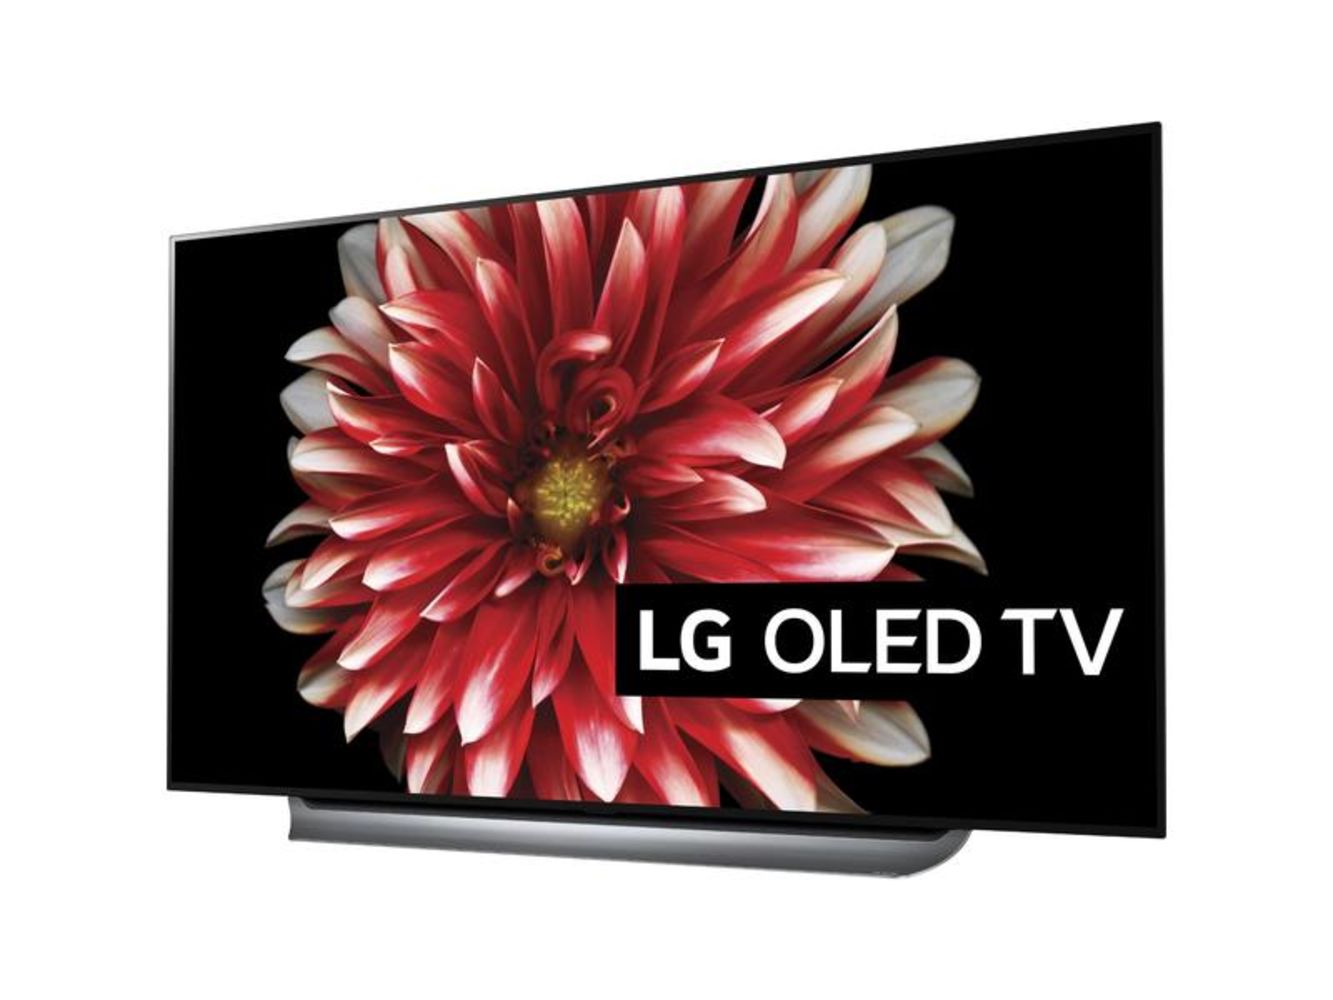 Clearance of LG TVs & Monitors - Including 4K UHD Smart TVs In A Range Of Sizes, HD Monitors And Ultra-Wide Gaming Monitors